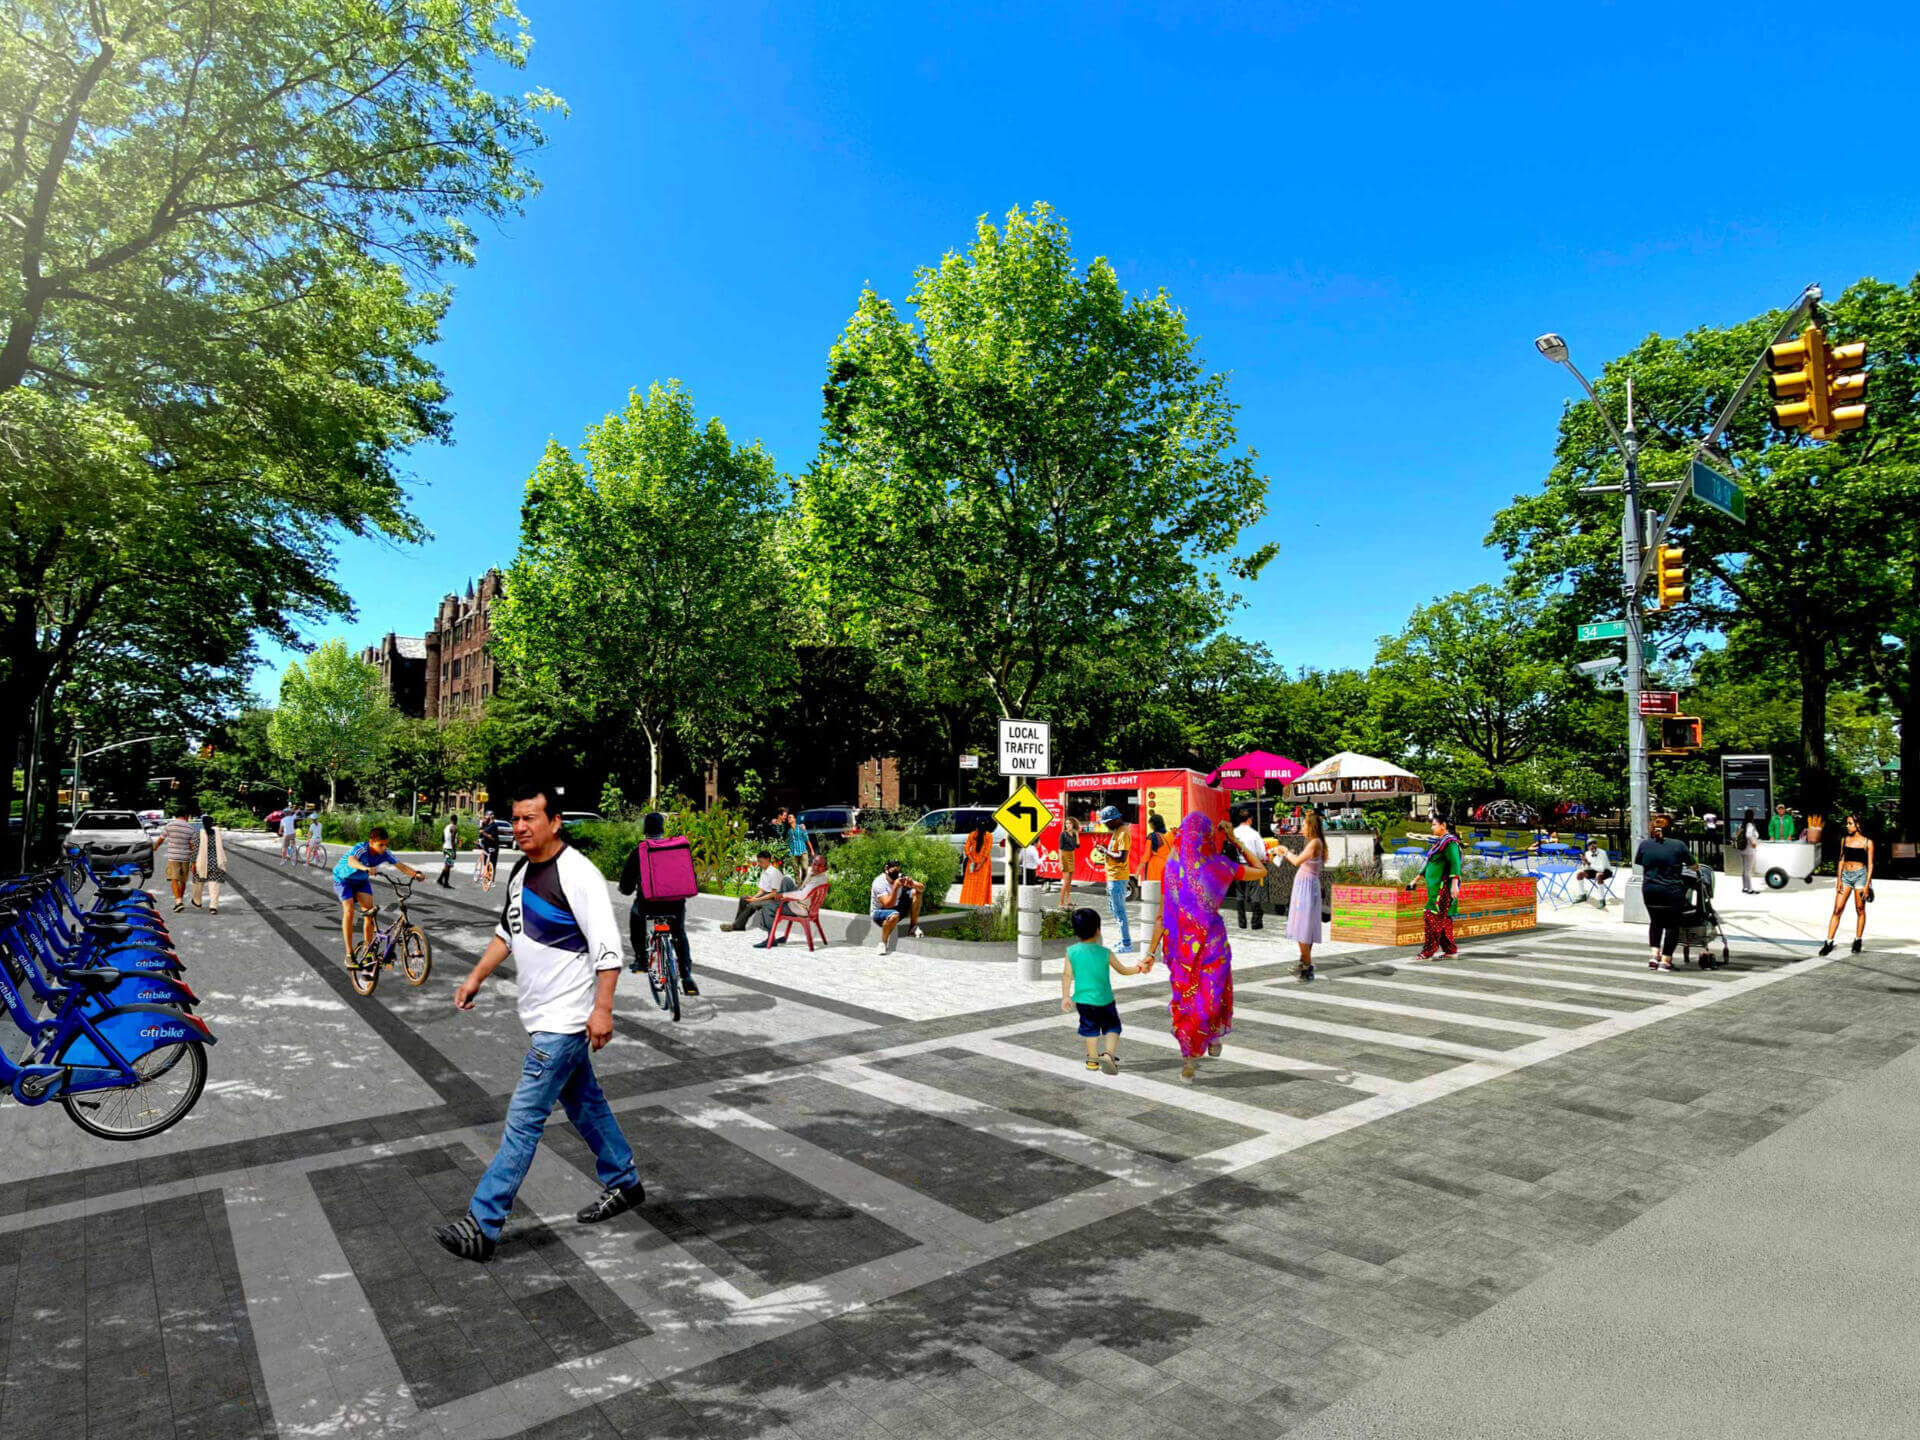 Rendering of tree lined street with a swales full of greenery, public seating, space for vendors, protected bike lanes, a Citi Bike doc, children, working cyclists and pedestrians walking safely in an ample cross-walk.